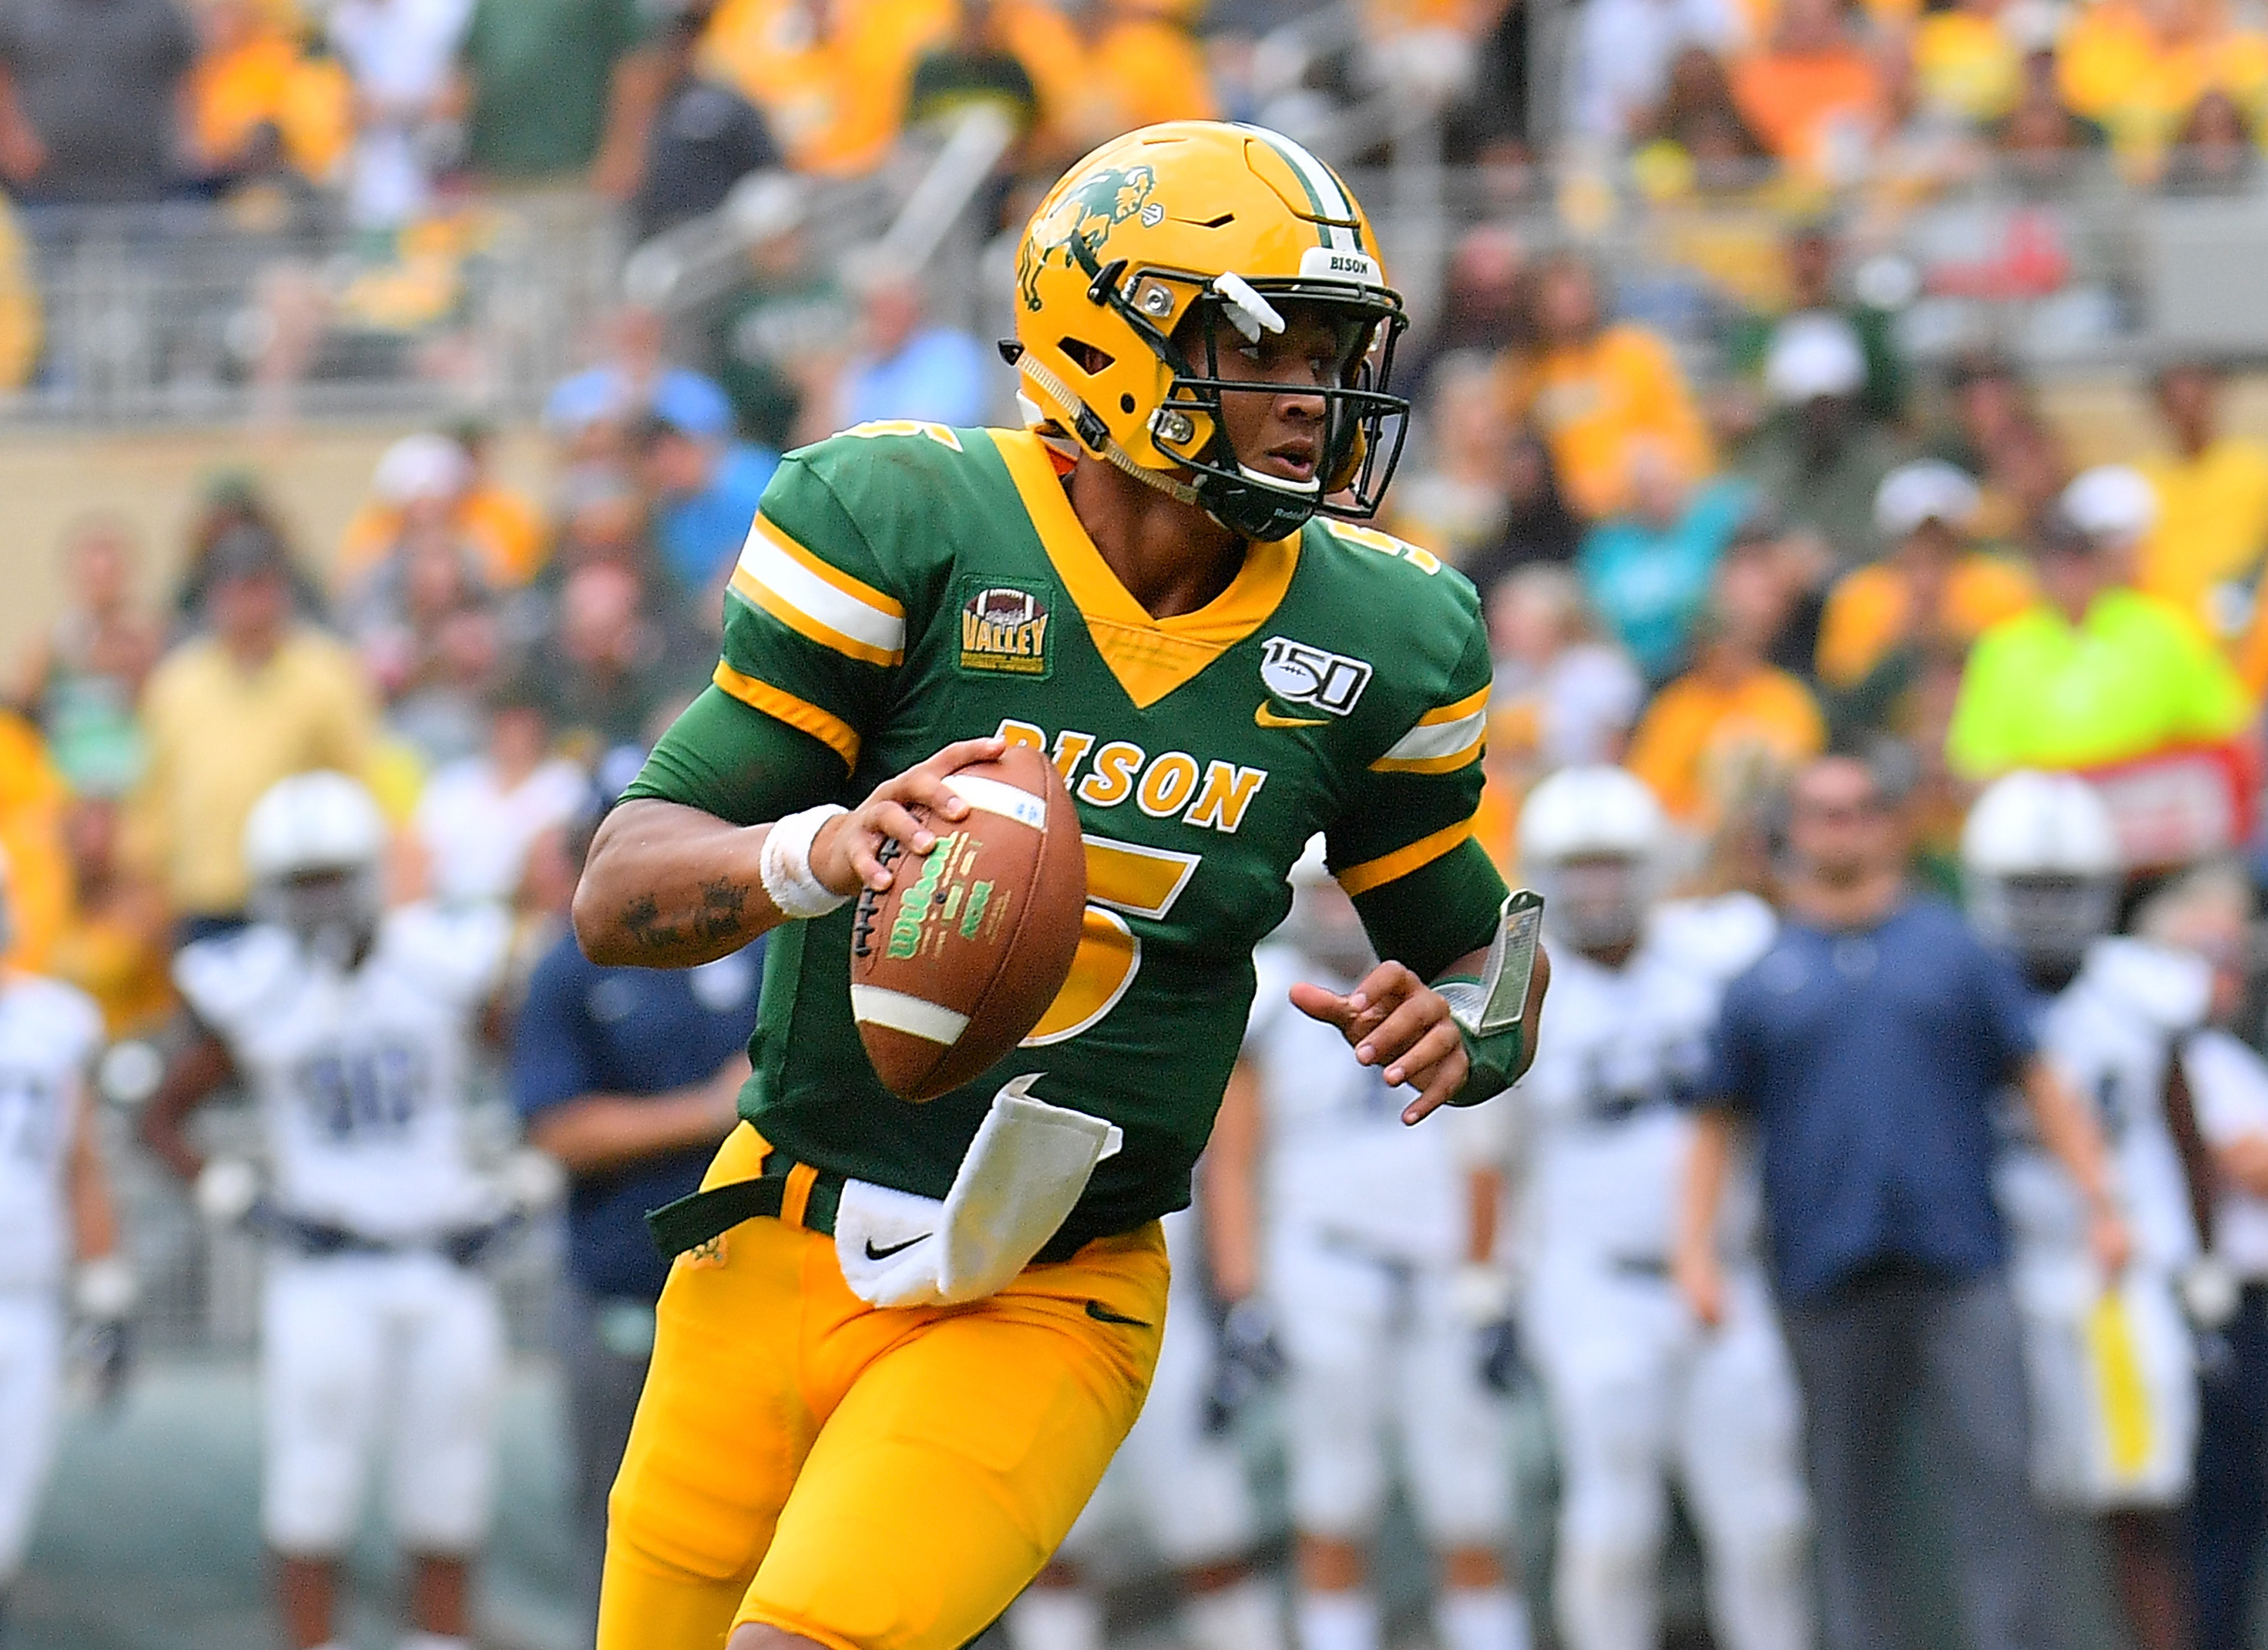 Quarterback Trey Lance #5 of the North Dakota State Bison looks to pass against the Butler Bulldogs during their game at Target Field on August 31, 2019 in Minneapolis, Minnesota.